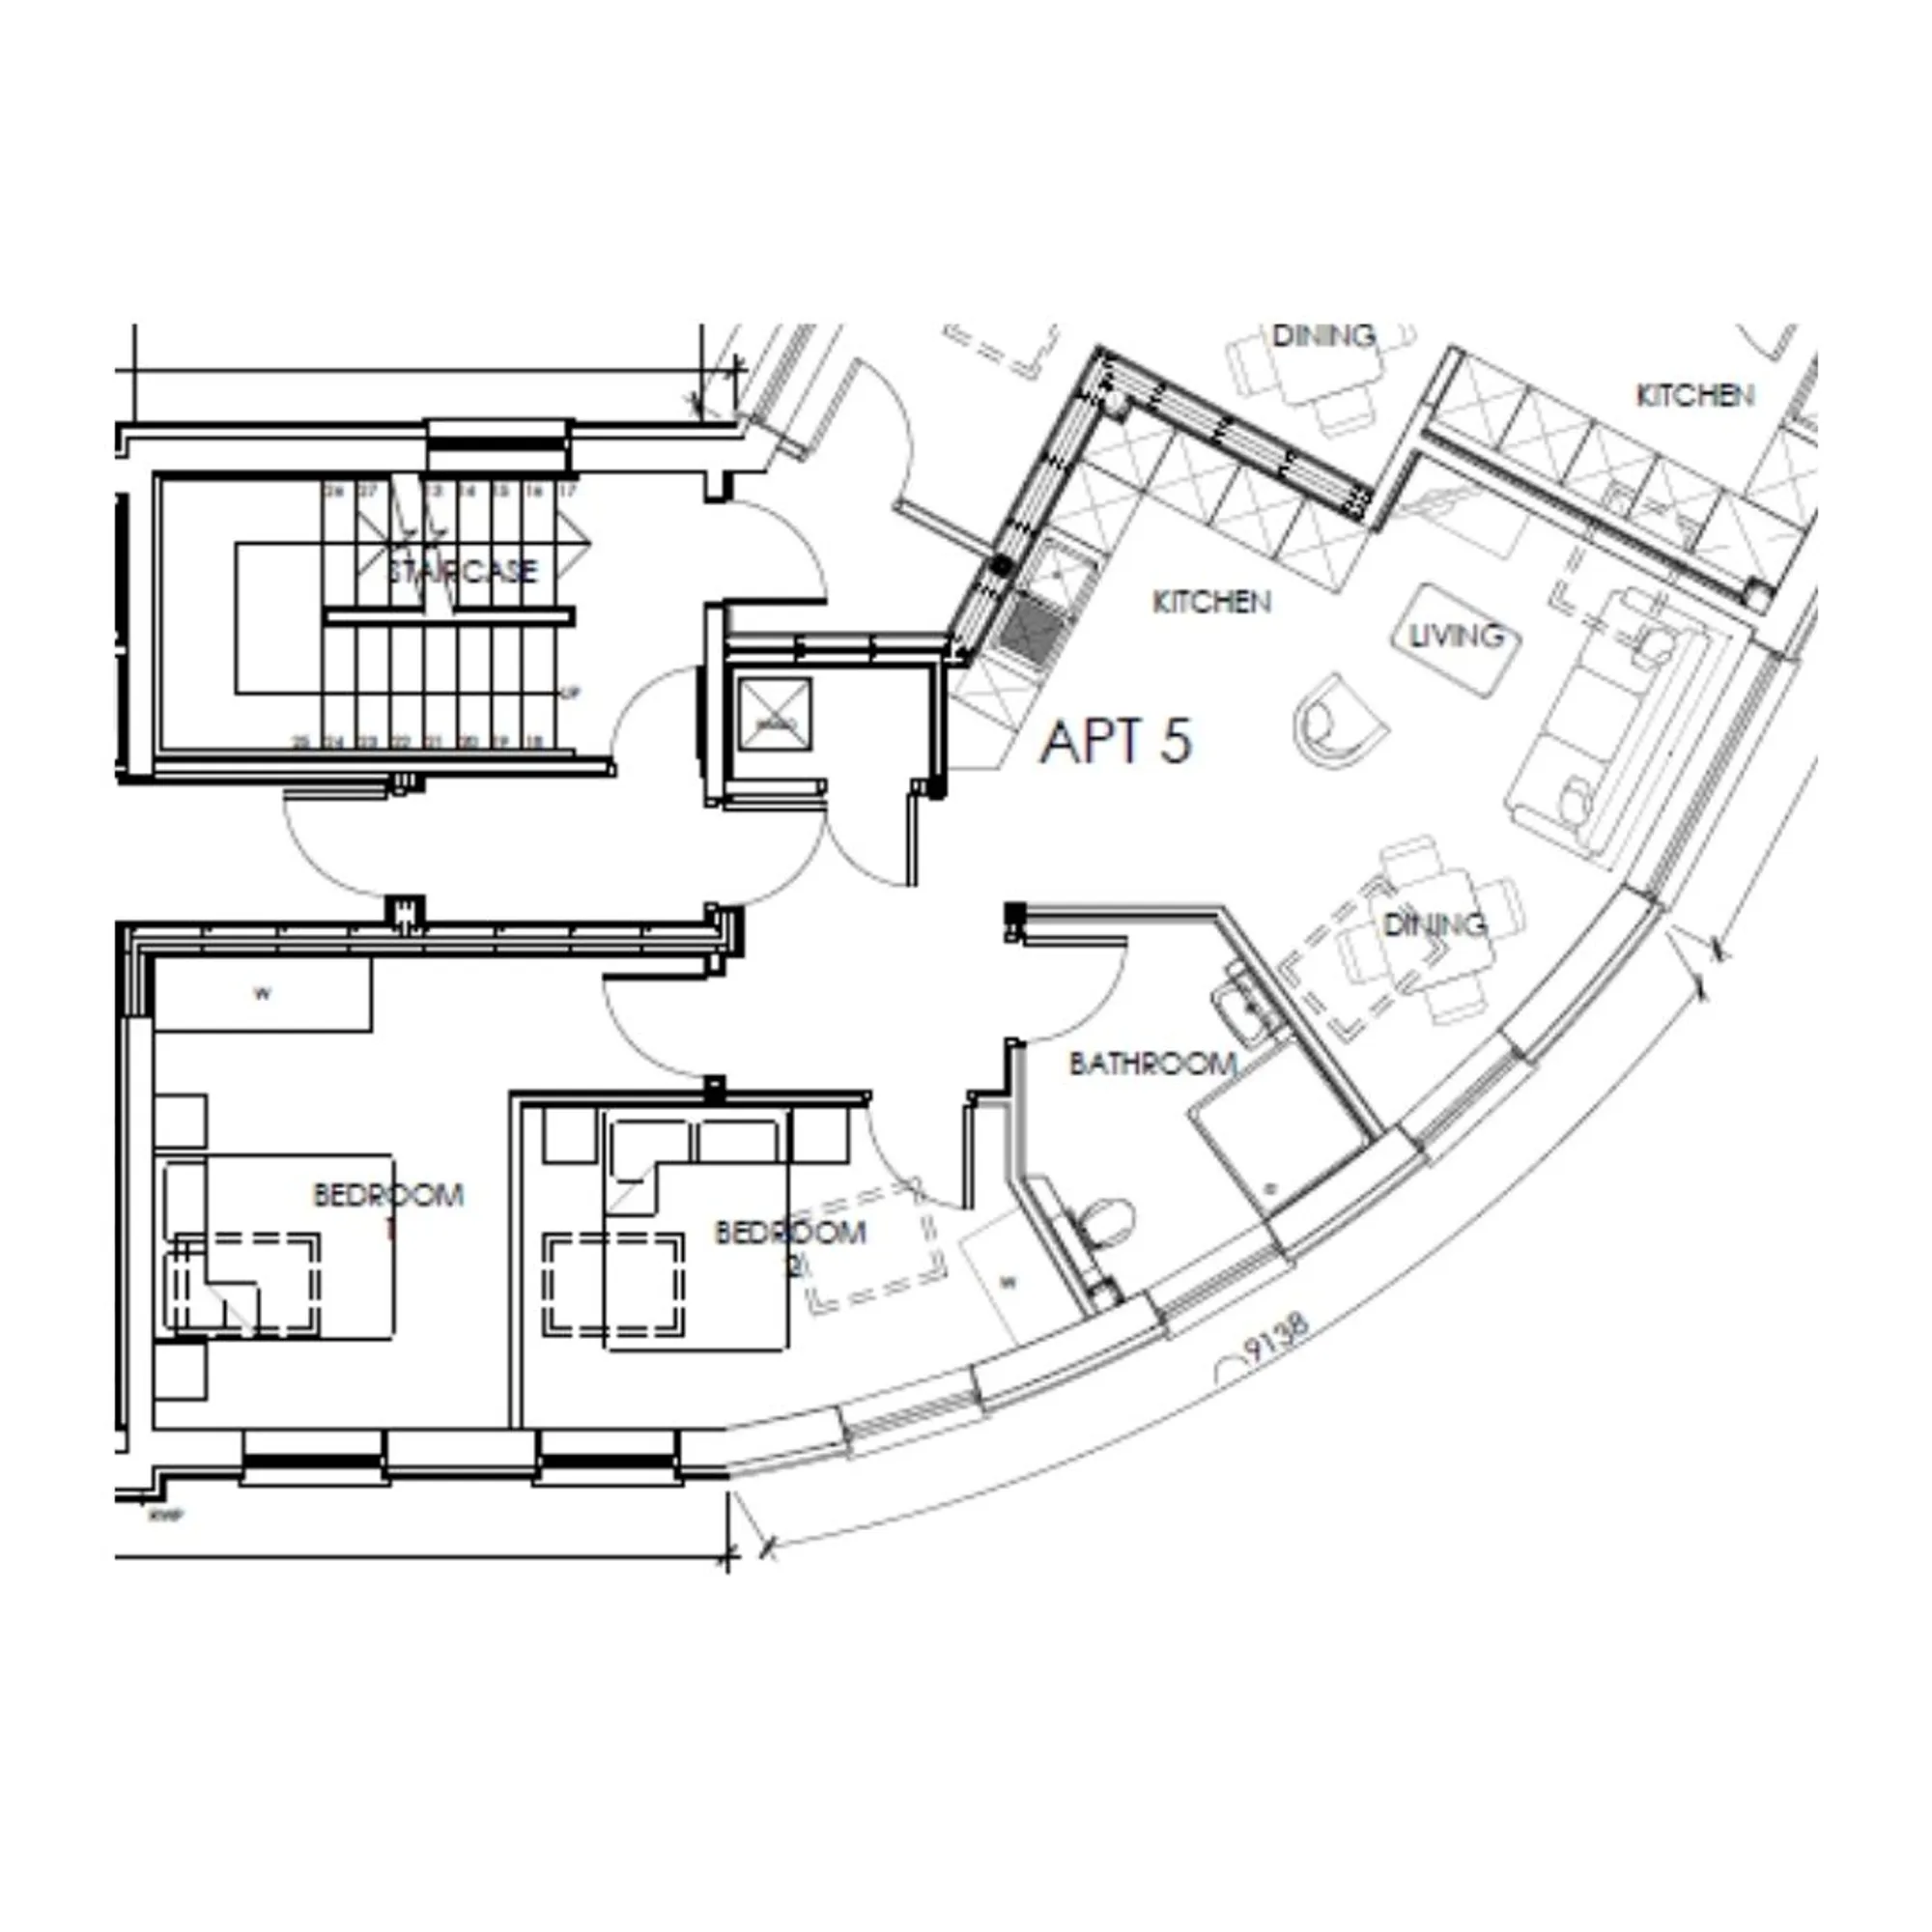 2 bed apartment to rent in Houlditch Road, Leicester - Property floorplan